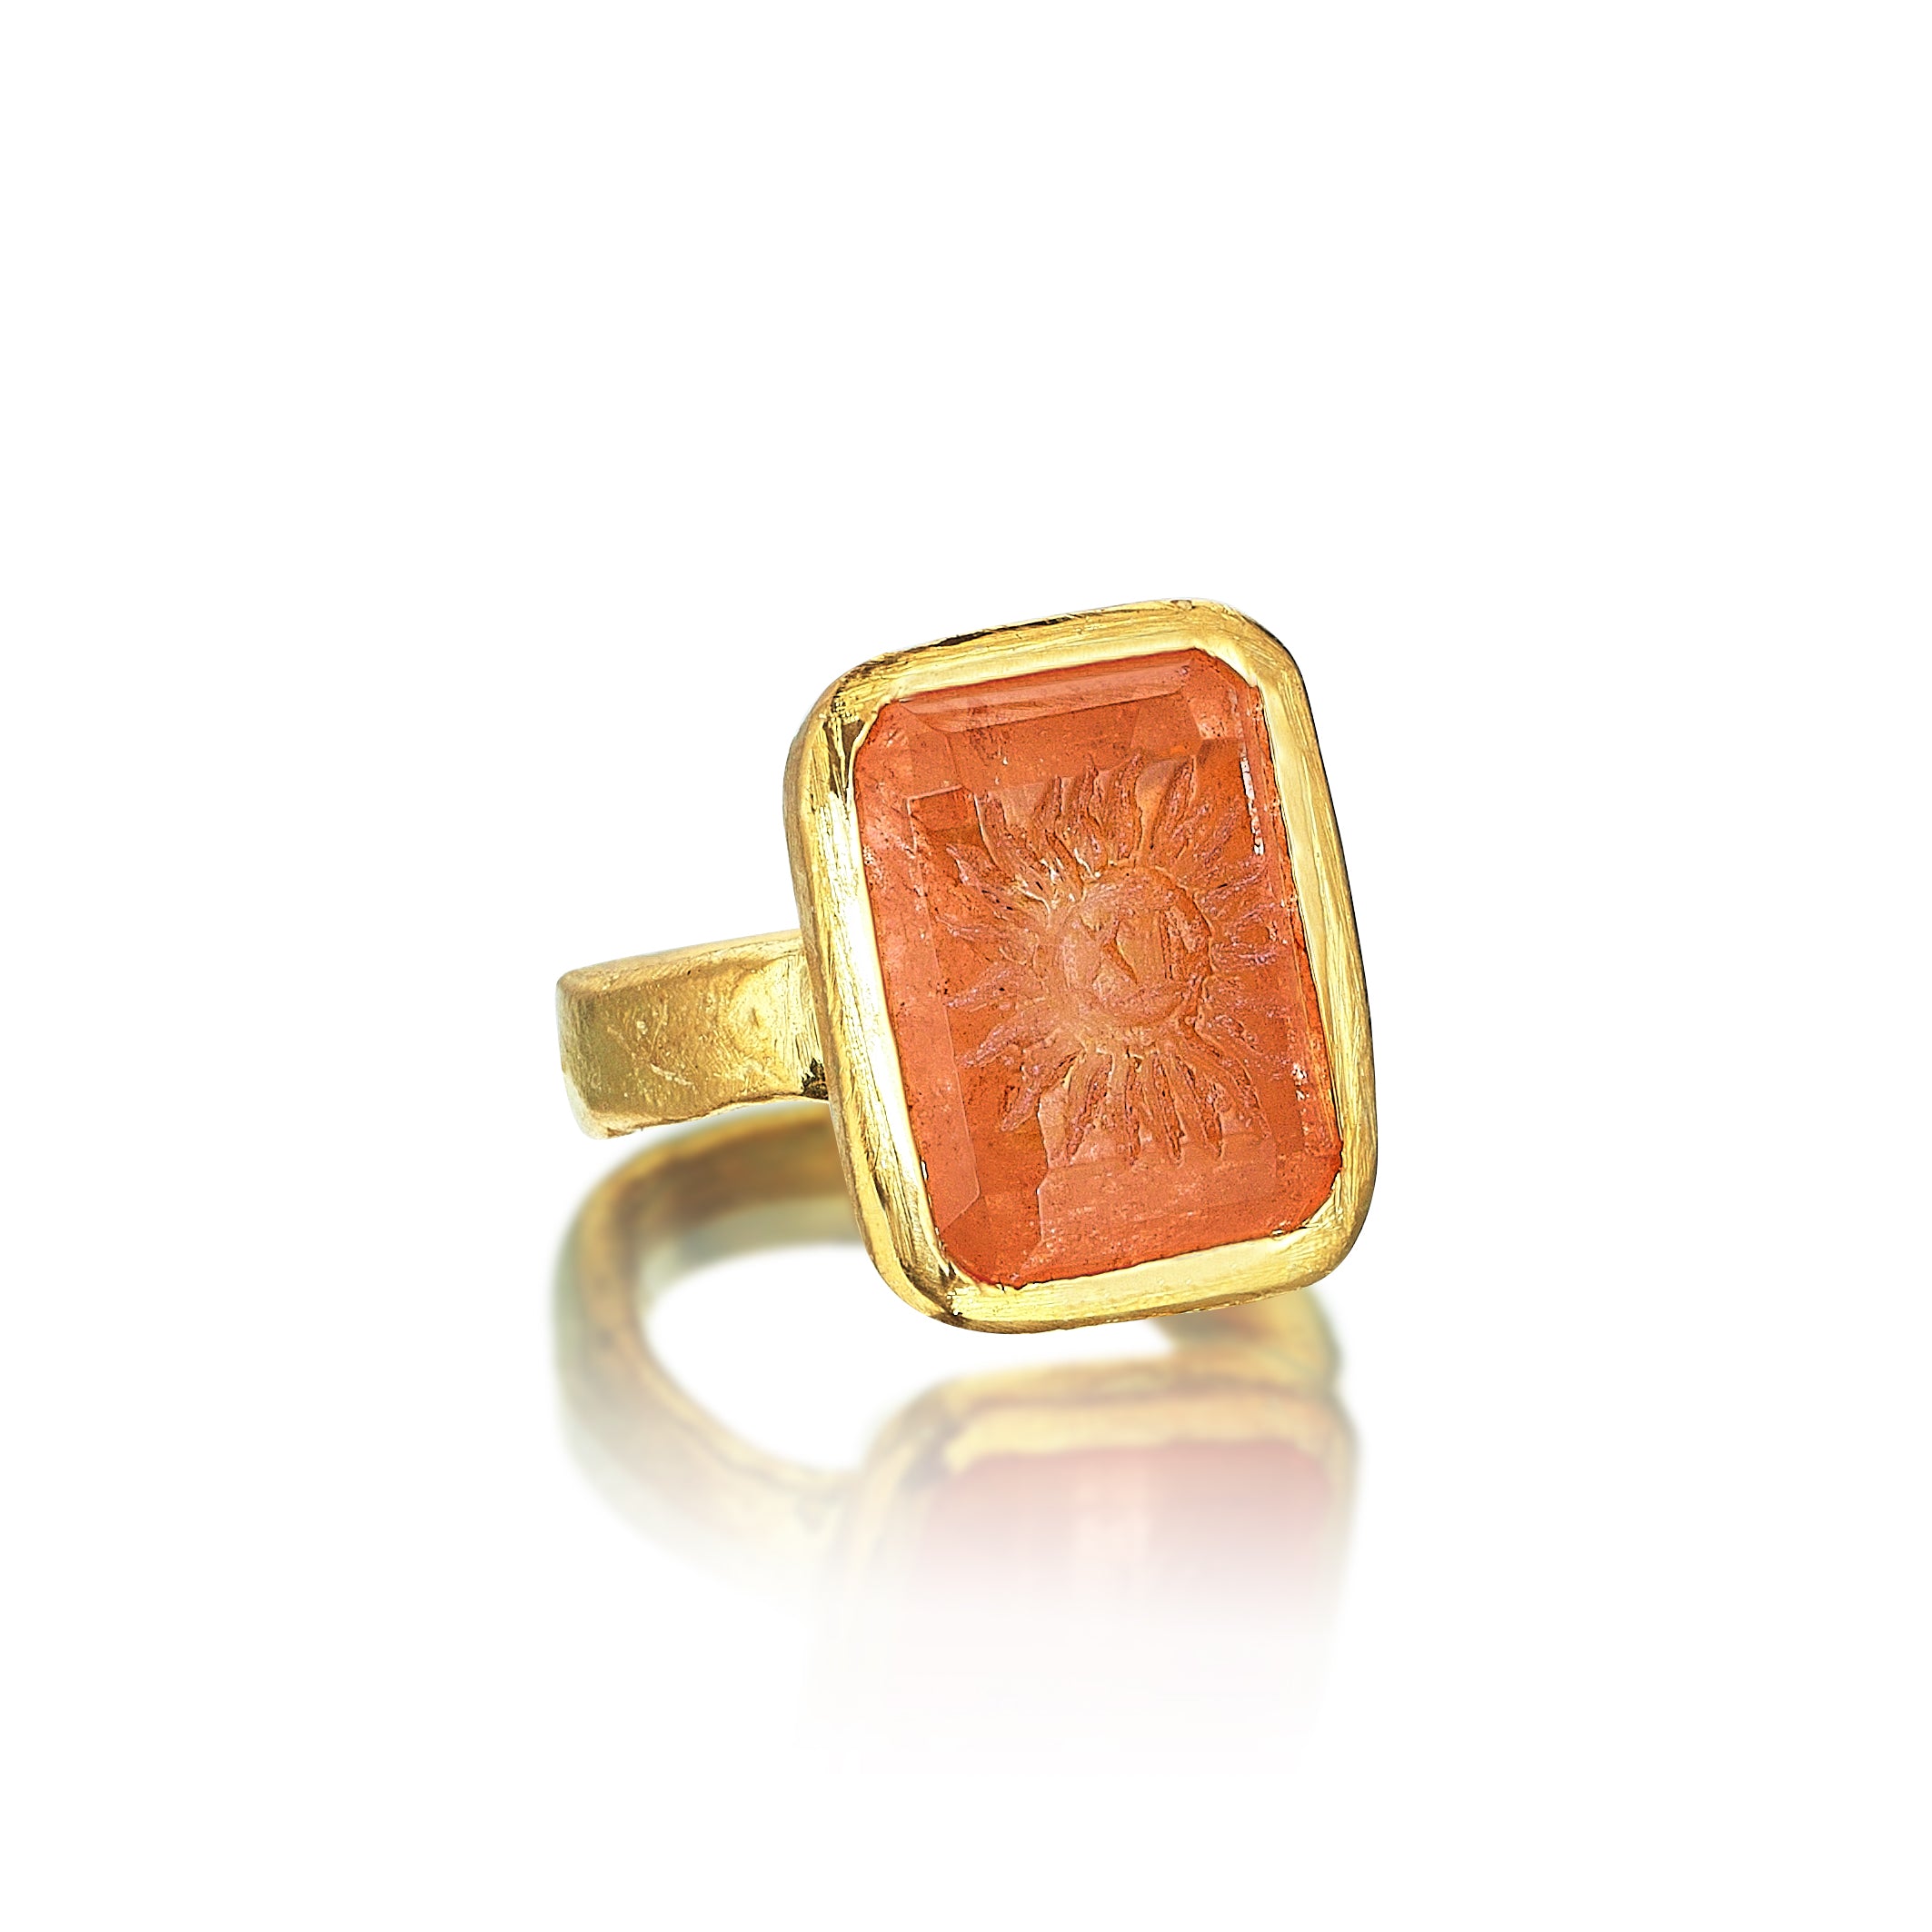 THE HELIOS RING